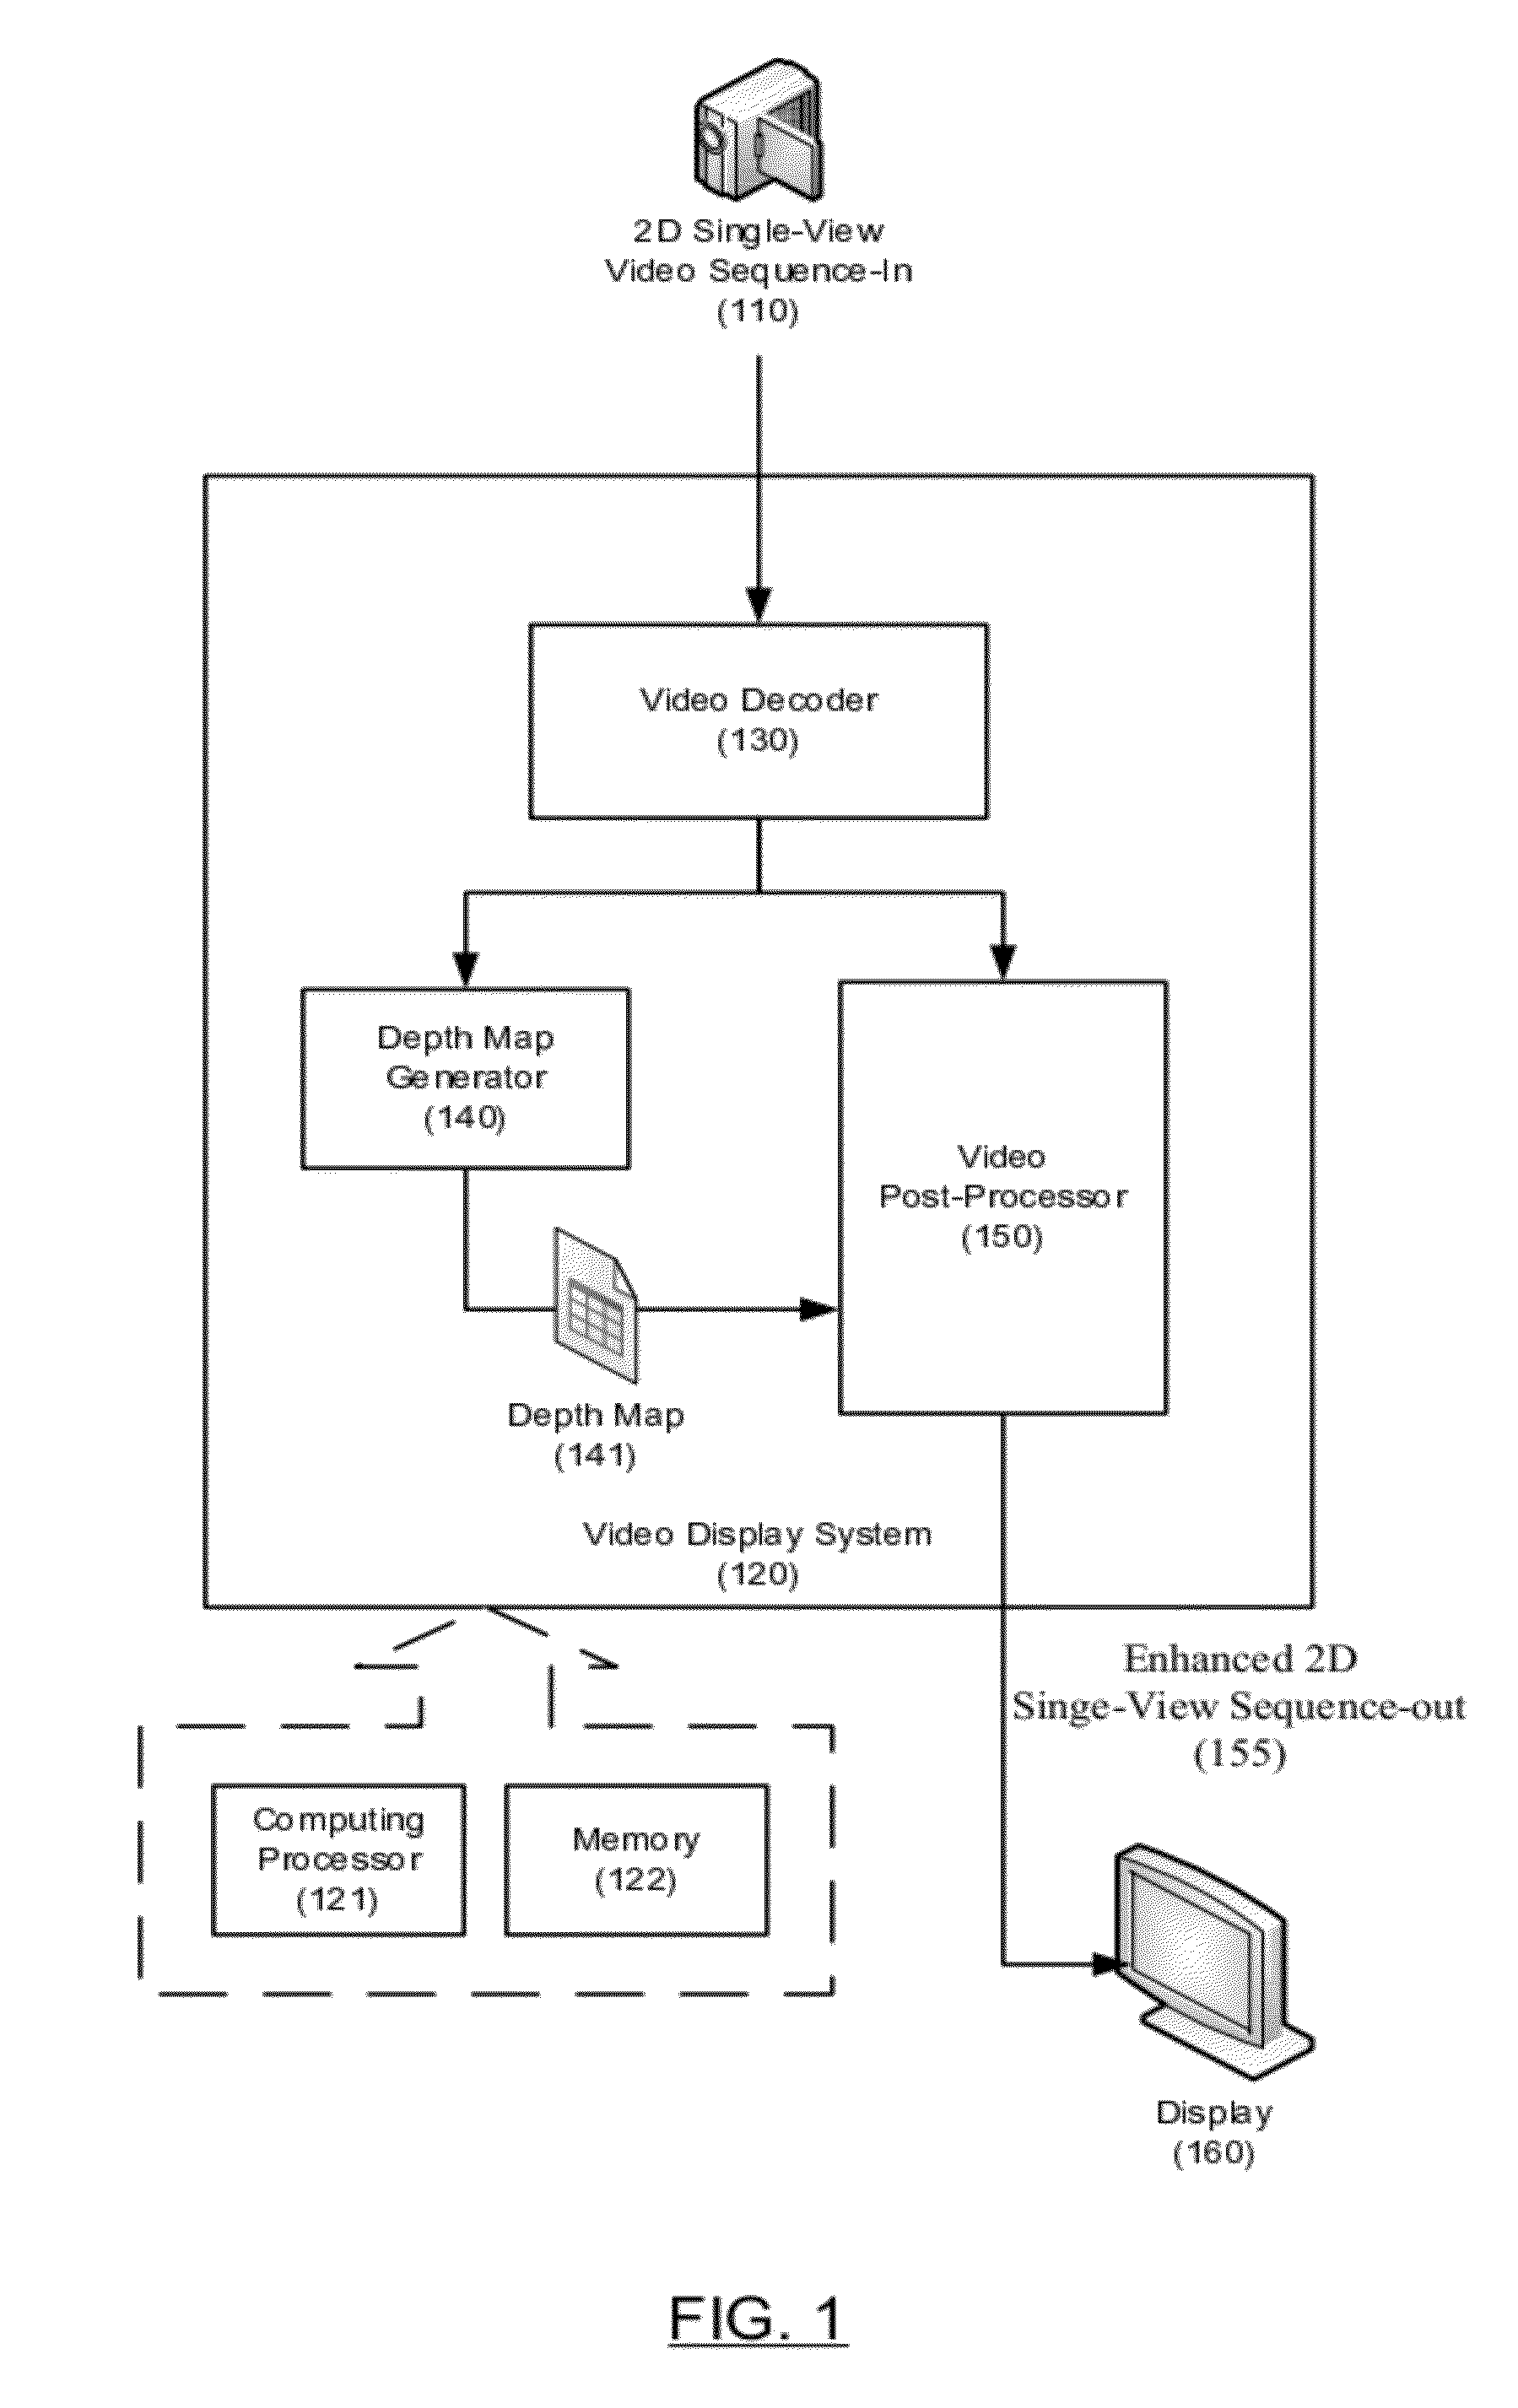 Real-time depth-aware image enhancement system